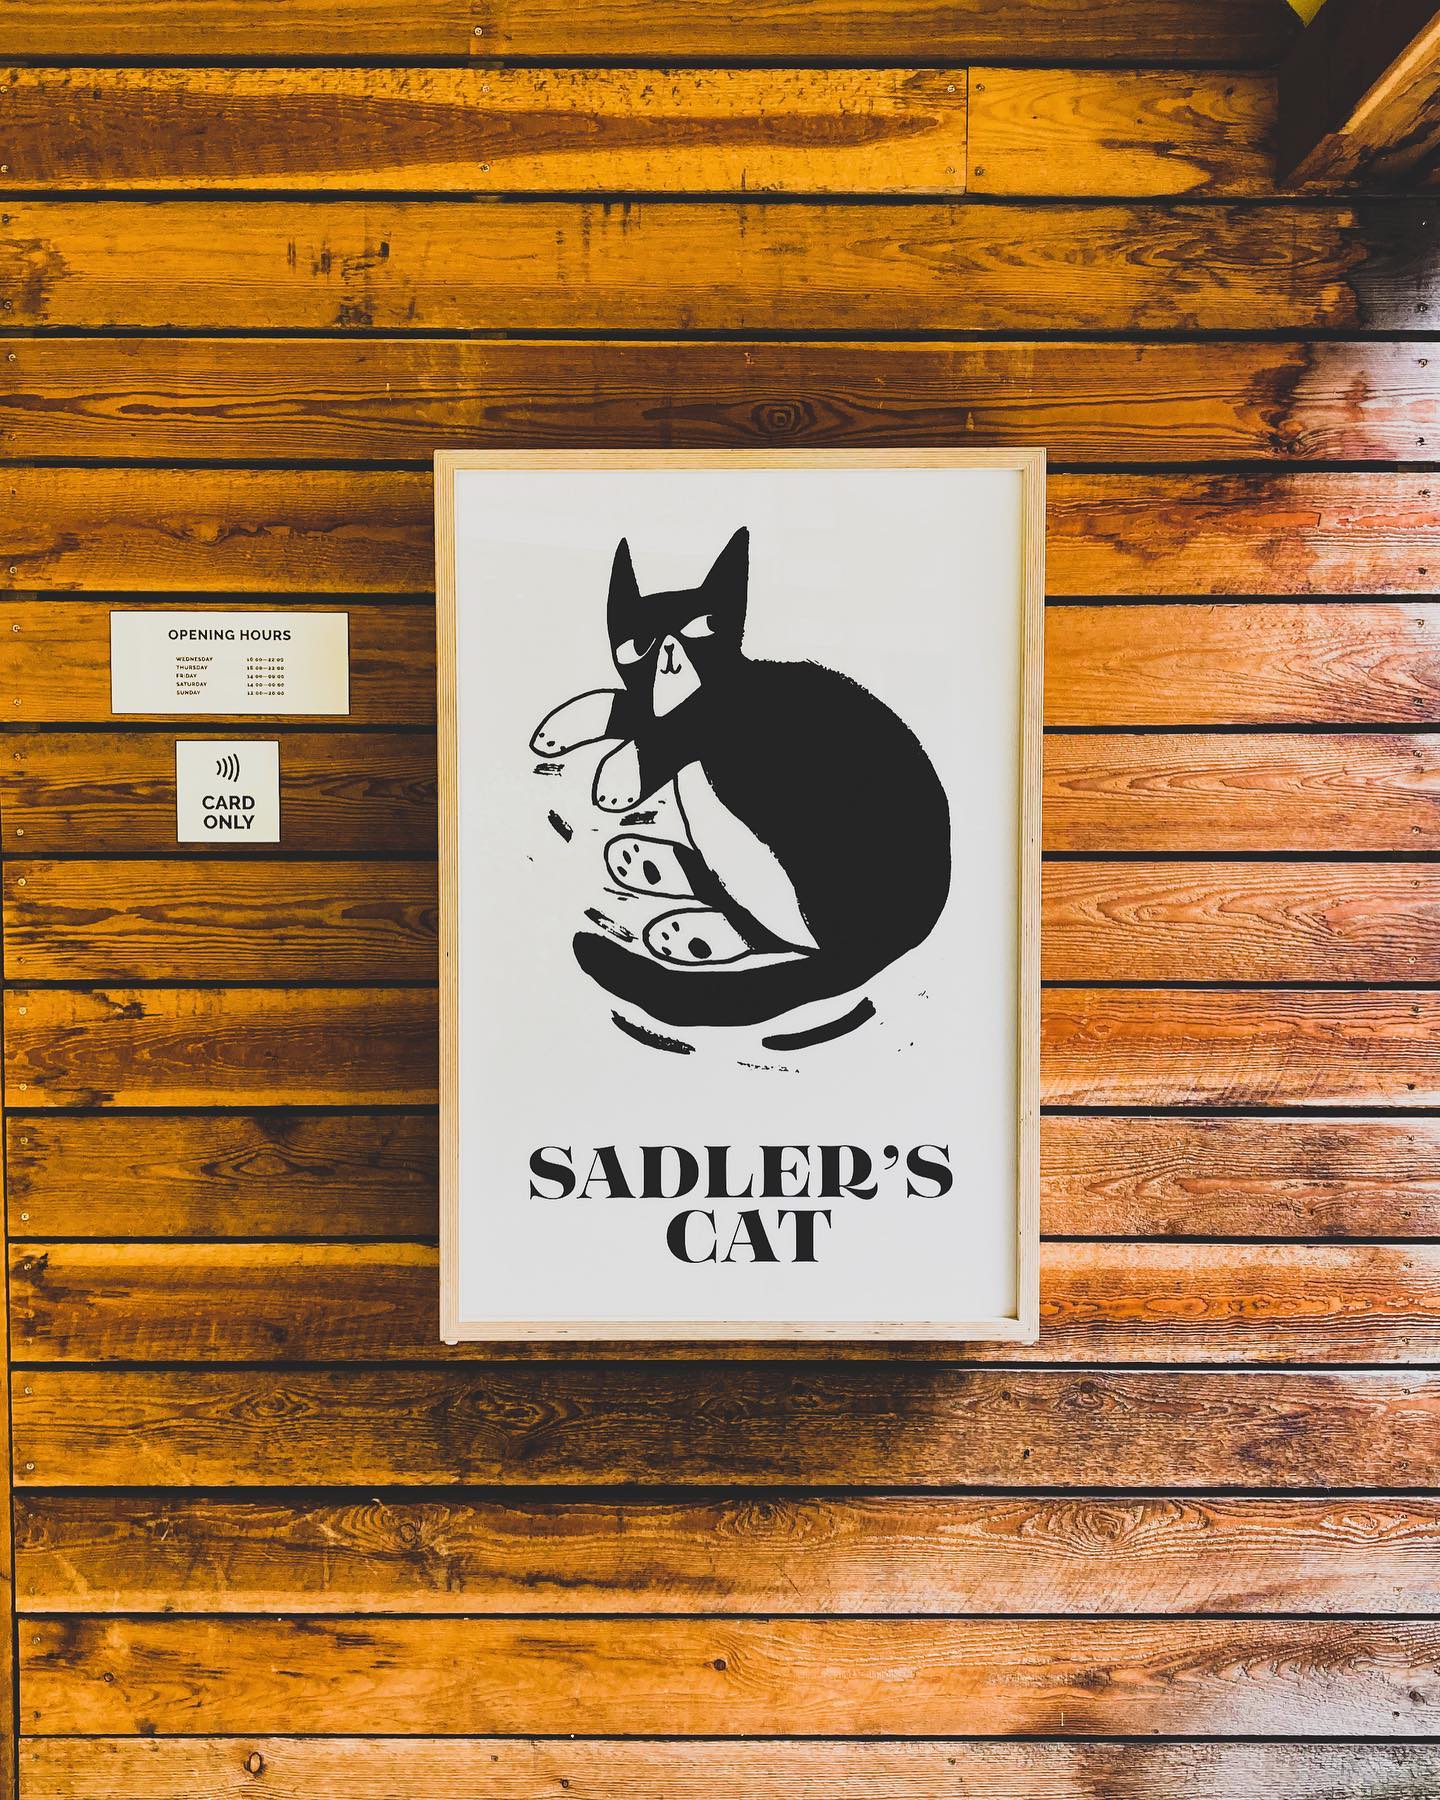 Sadler's Cat is a craft beer pub near the Manchester Christmas Markets